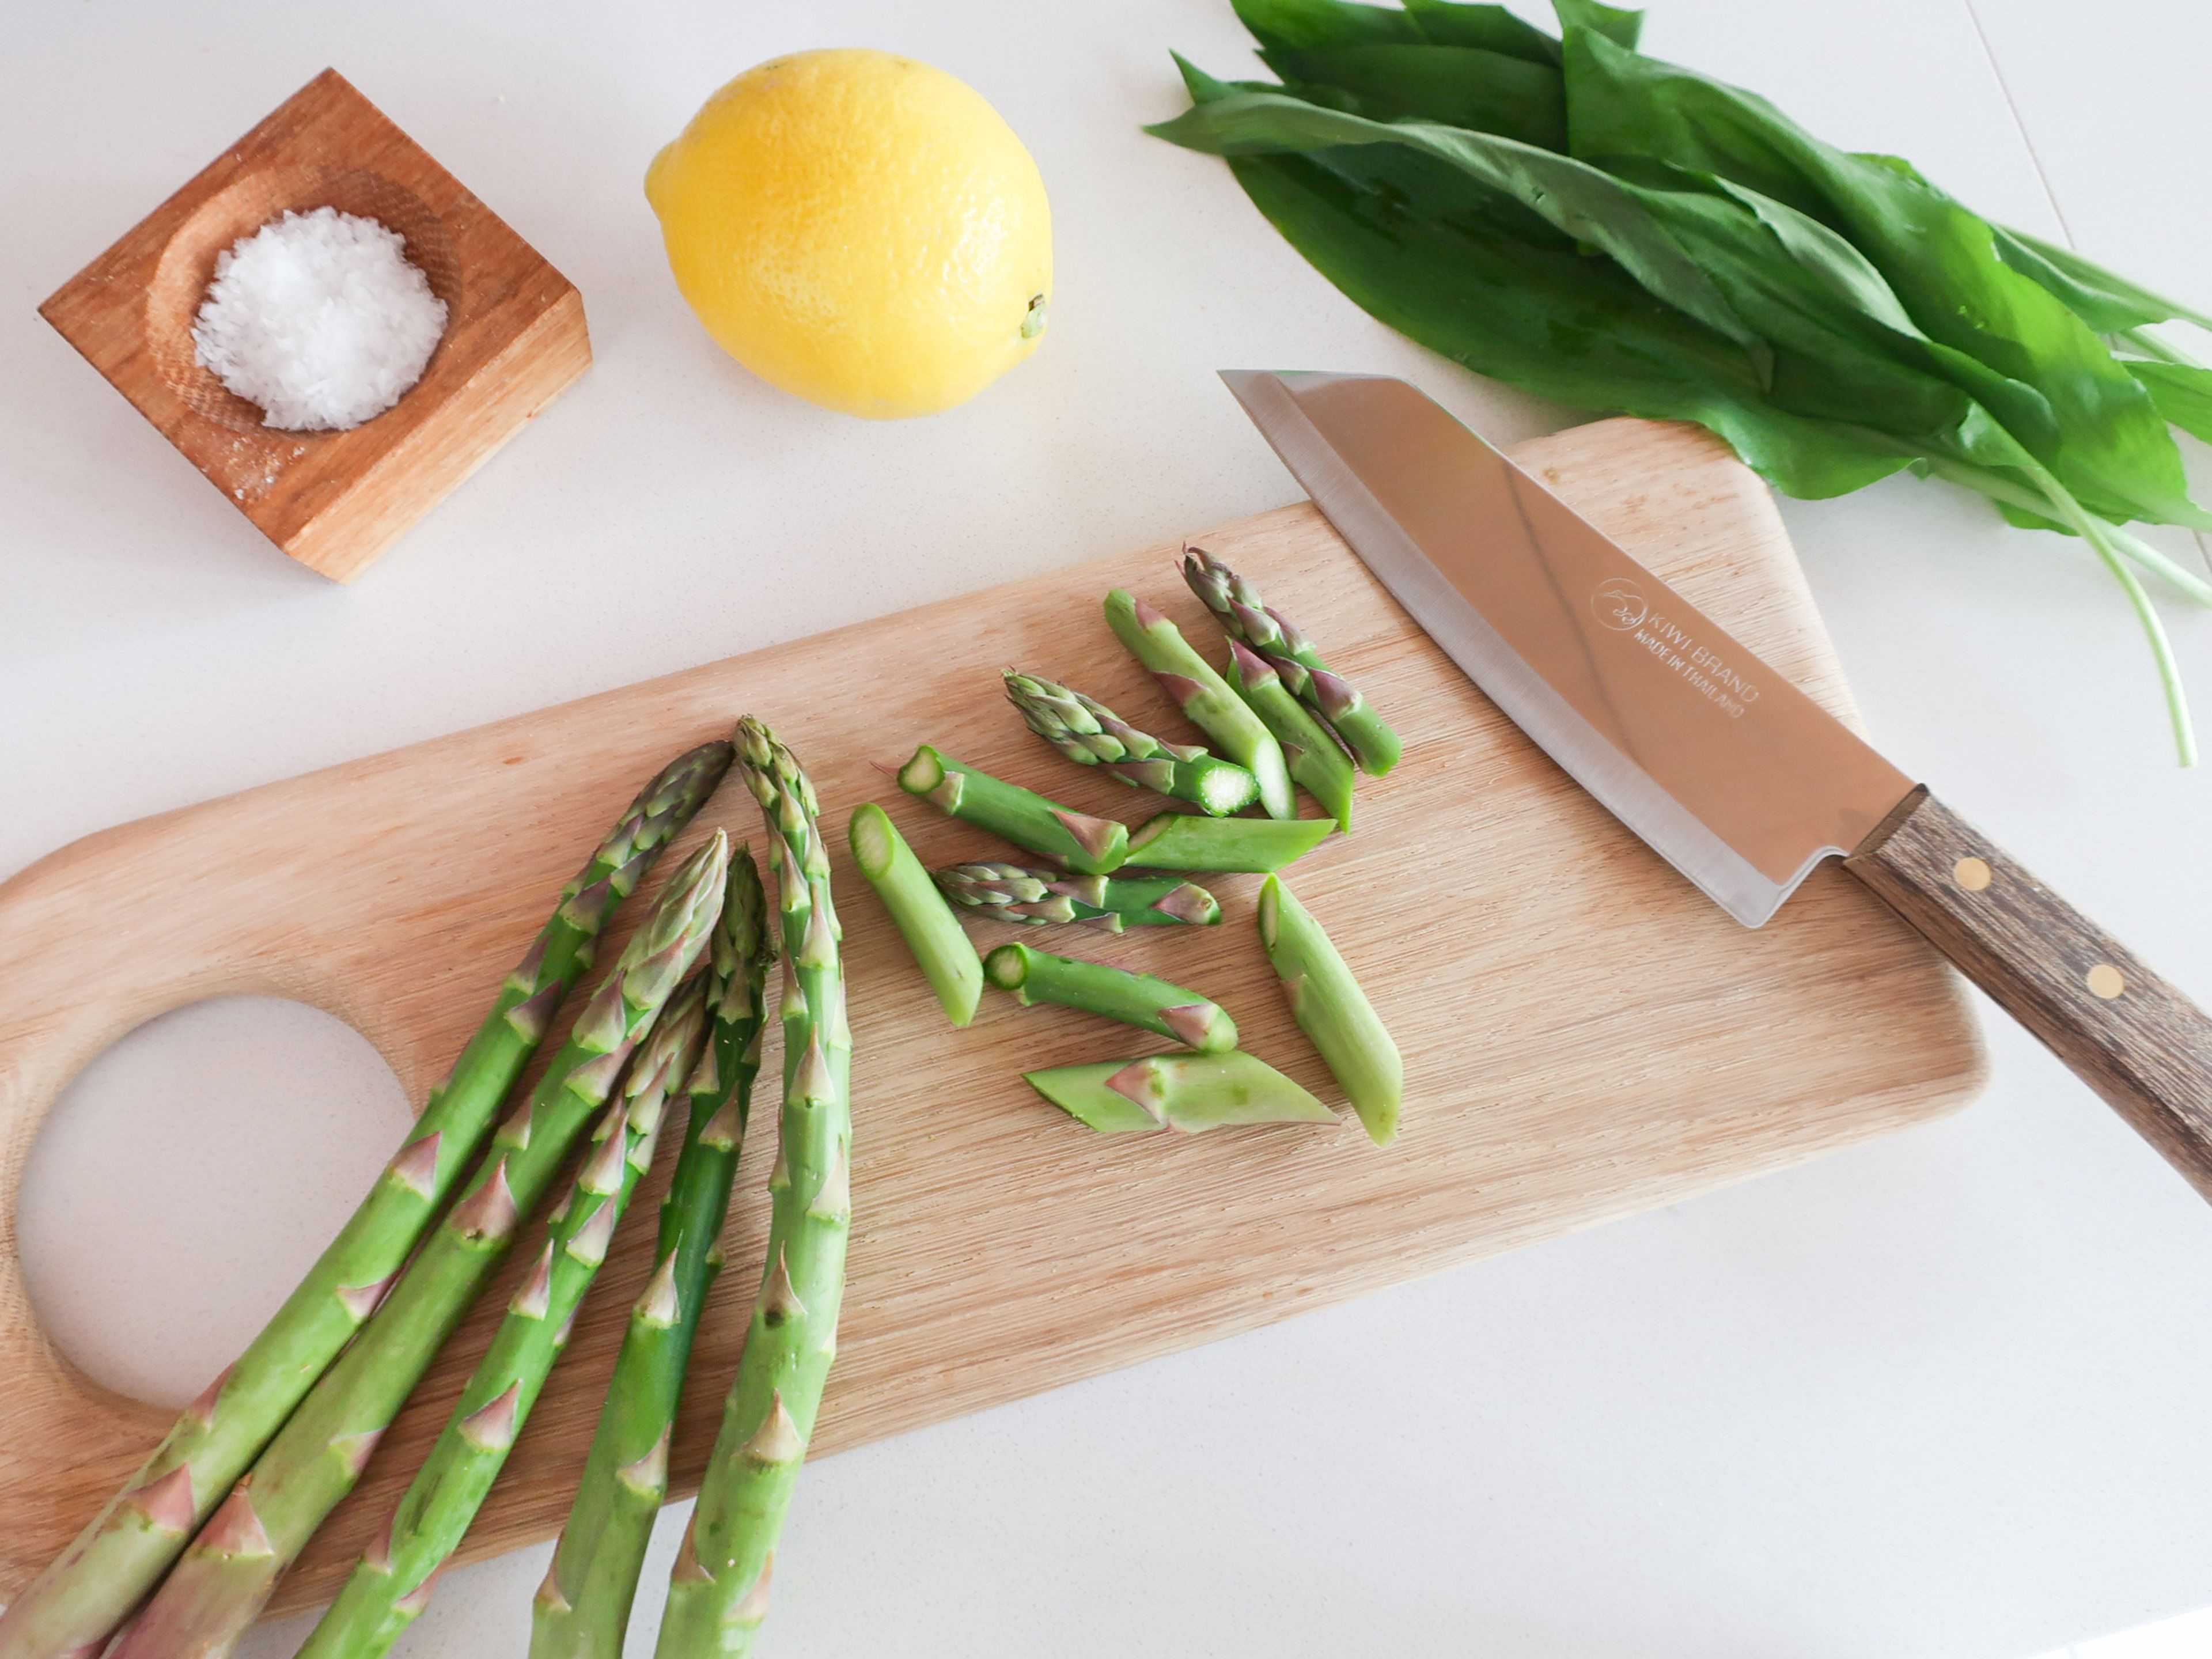 Remove stems from wild garlic and set leaves aside. Peel the onion, dice finely and set aside. Remove the woody ends of the asparagus. Slice off the asparagus tips and slice the stems into bite-sized pieces. Zest the lemon with a fine grater.